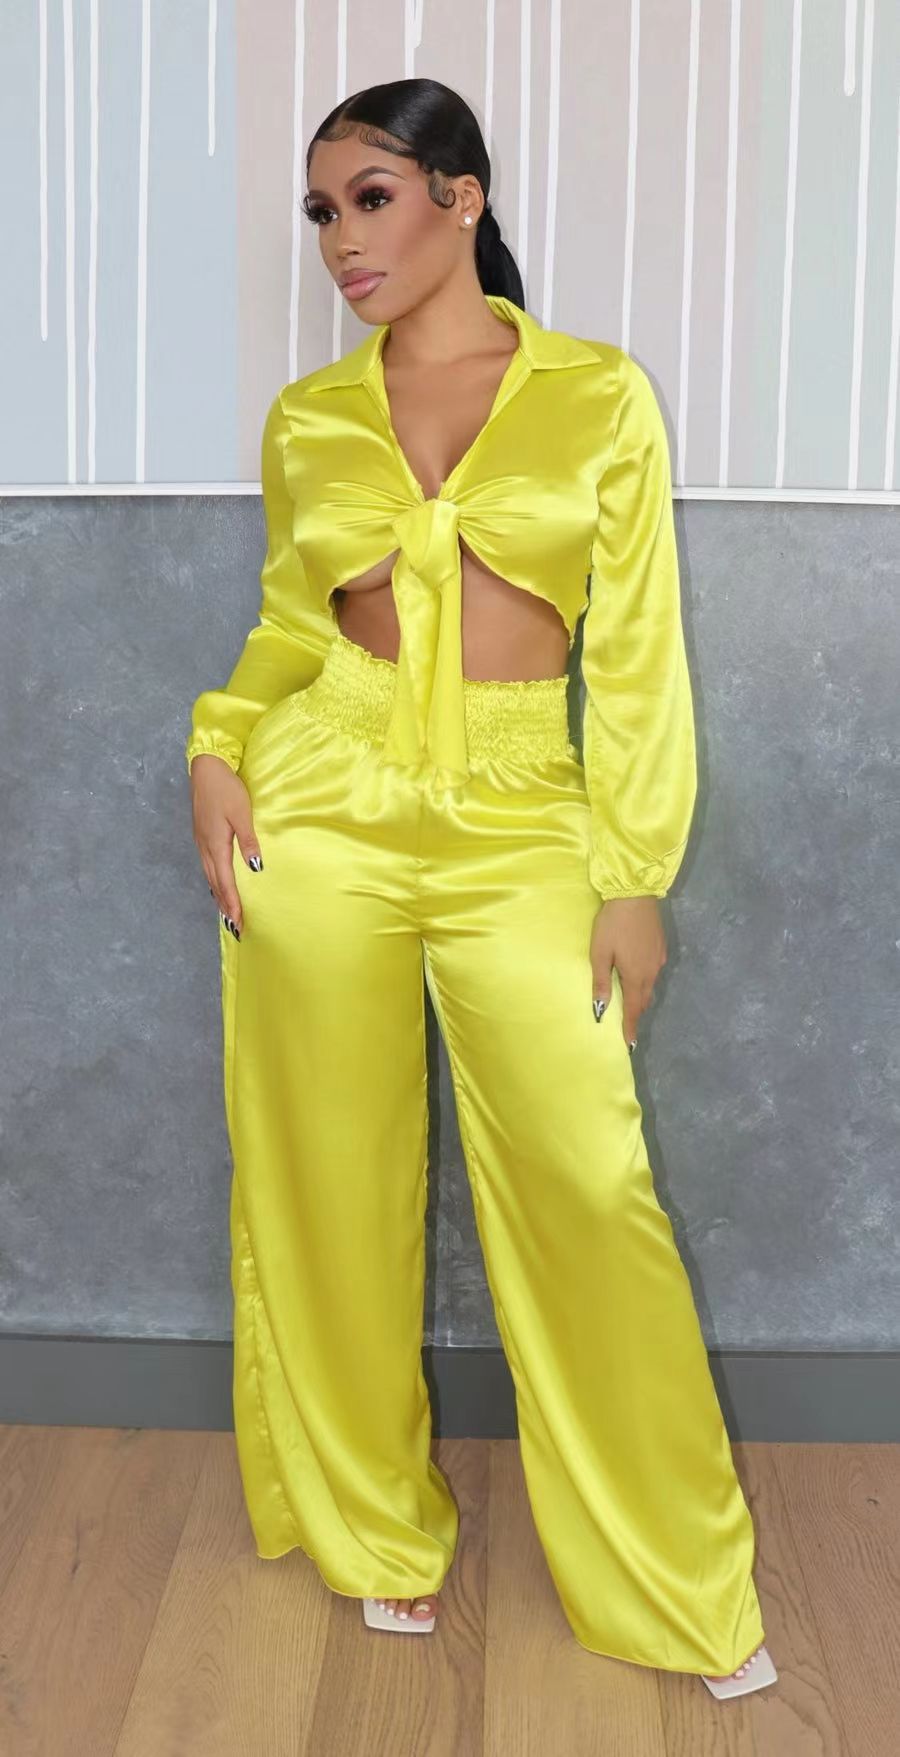 Fashion Outfits | Neon Aesthetic Front Tie Crop Top High Waist Wide Leg Pants Outfit 2-piece Set